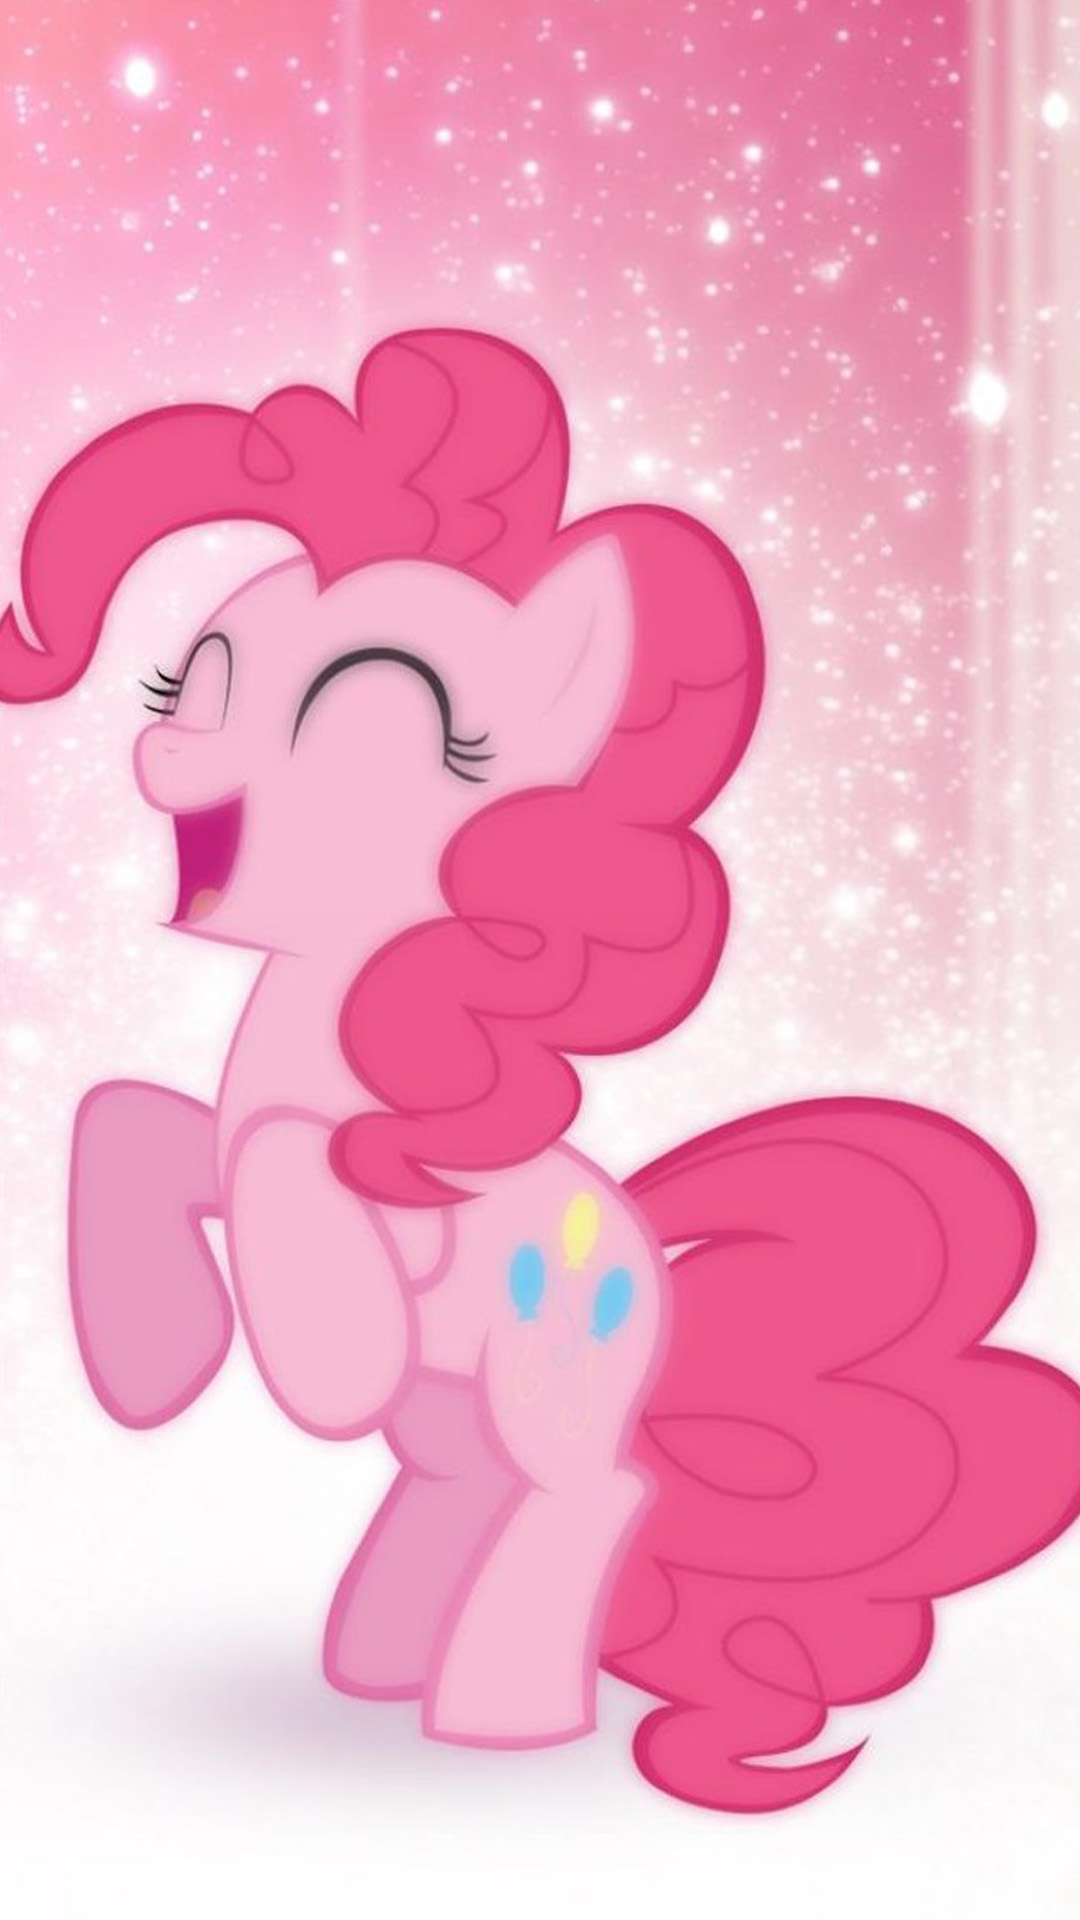 Cute Wallpapers For Iphone 6 - My Little Pony Character Pinkie Pie - HD Wallpaper 